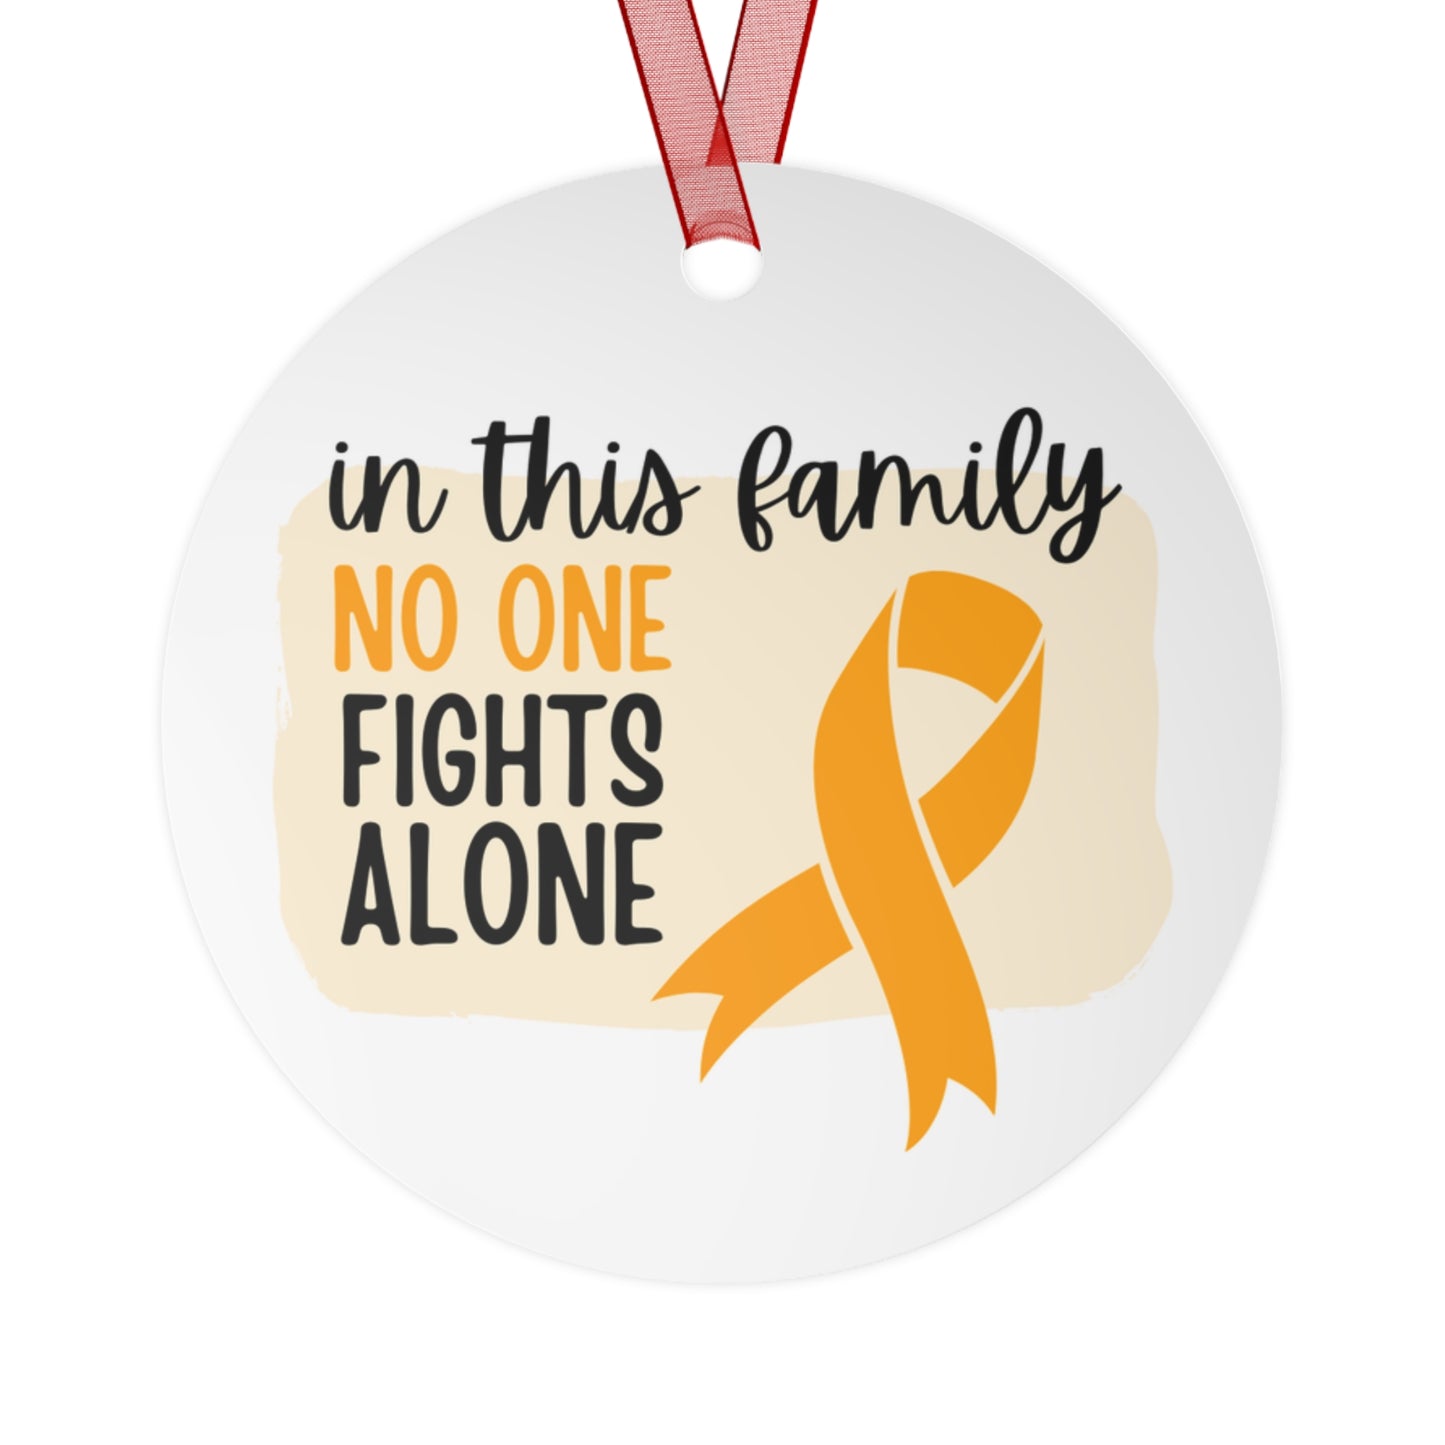 Leukemia Orange Ribbon Awareness Ornament -In this family no one fights alone- Family Support - Support for friend